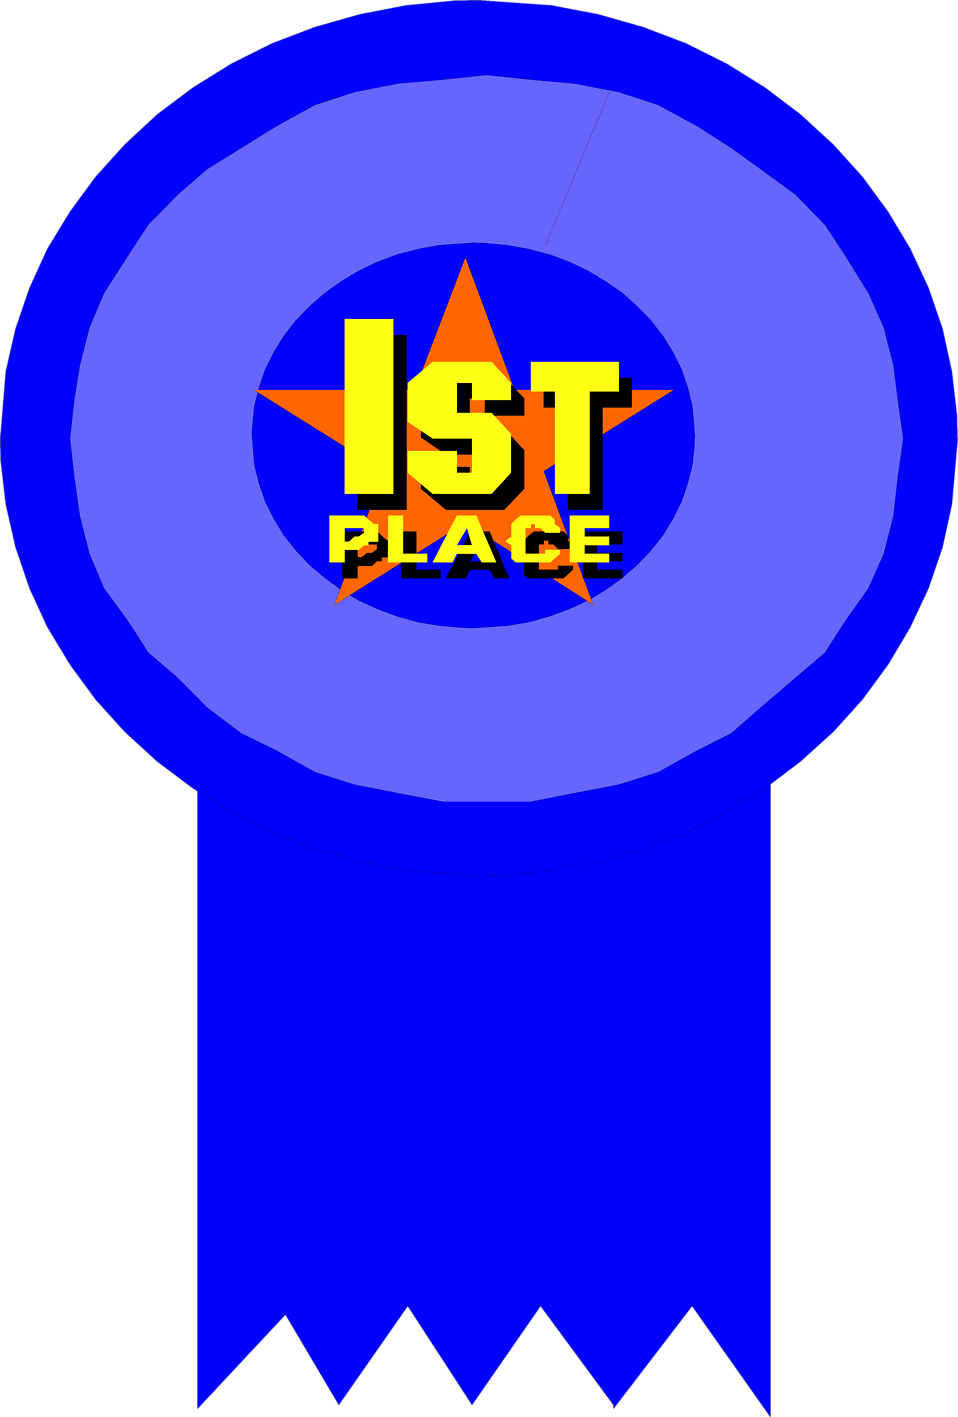 First Place Ribbon PNG Clipart Background